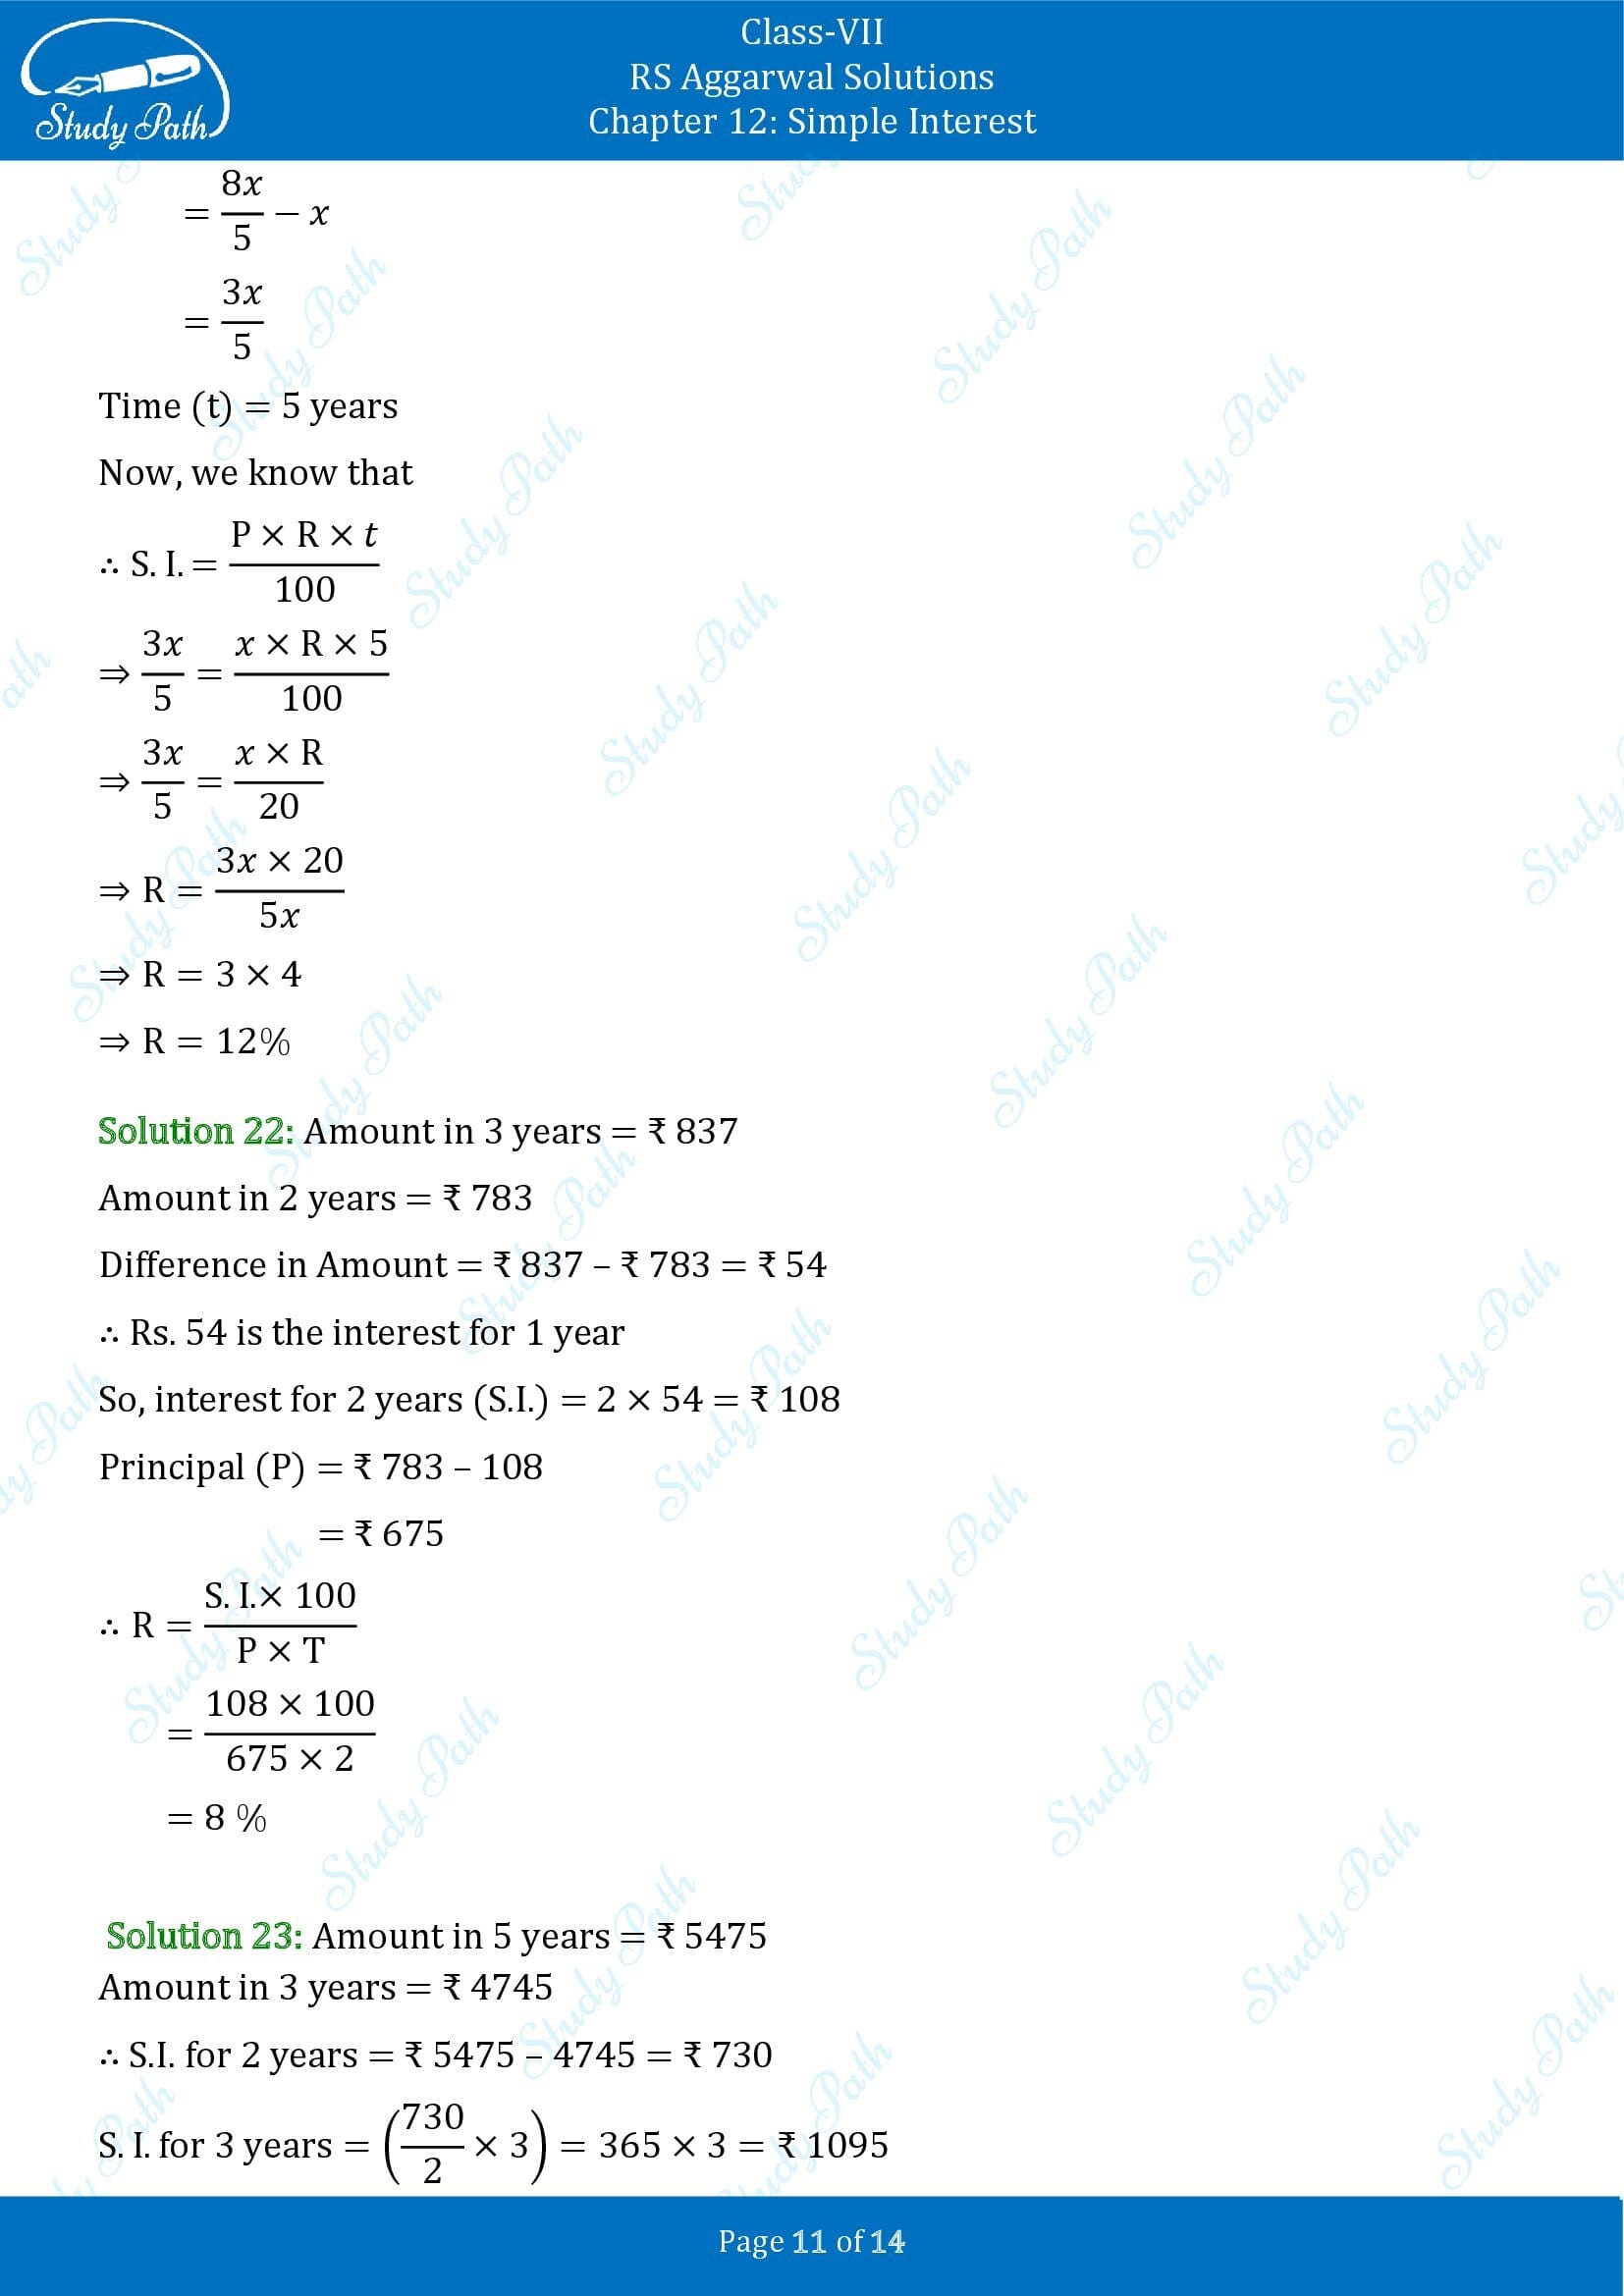 RS Aggarwal Solutions Class 7 Chapter 12 Simple Interest Exercise 12A 00011